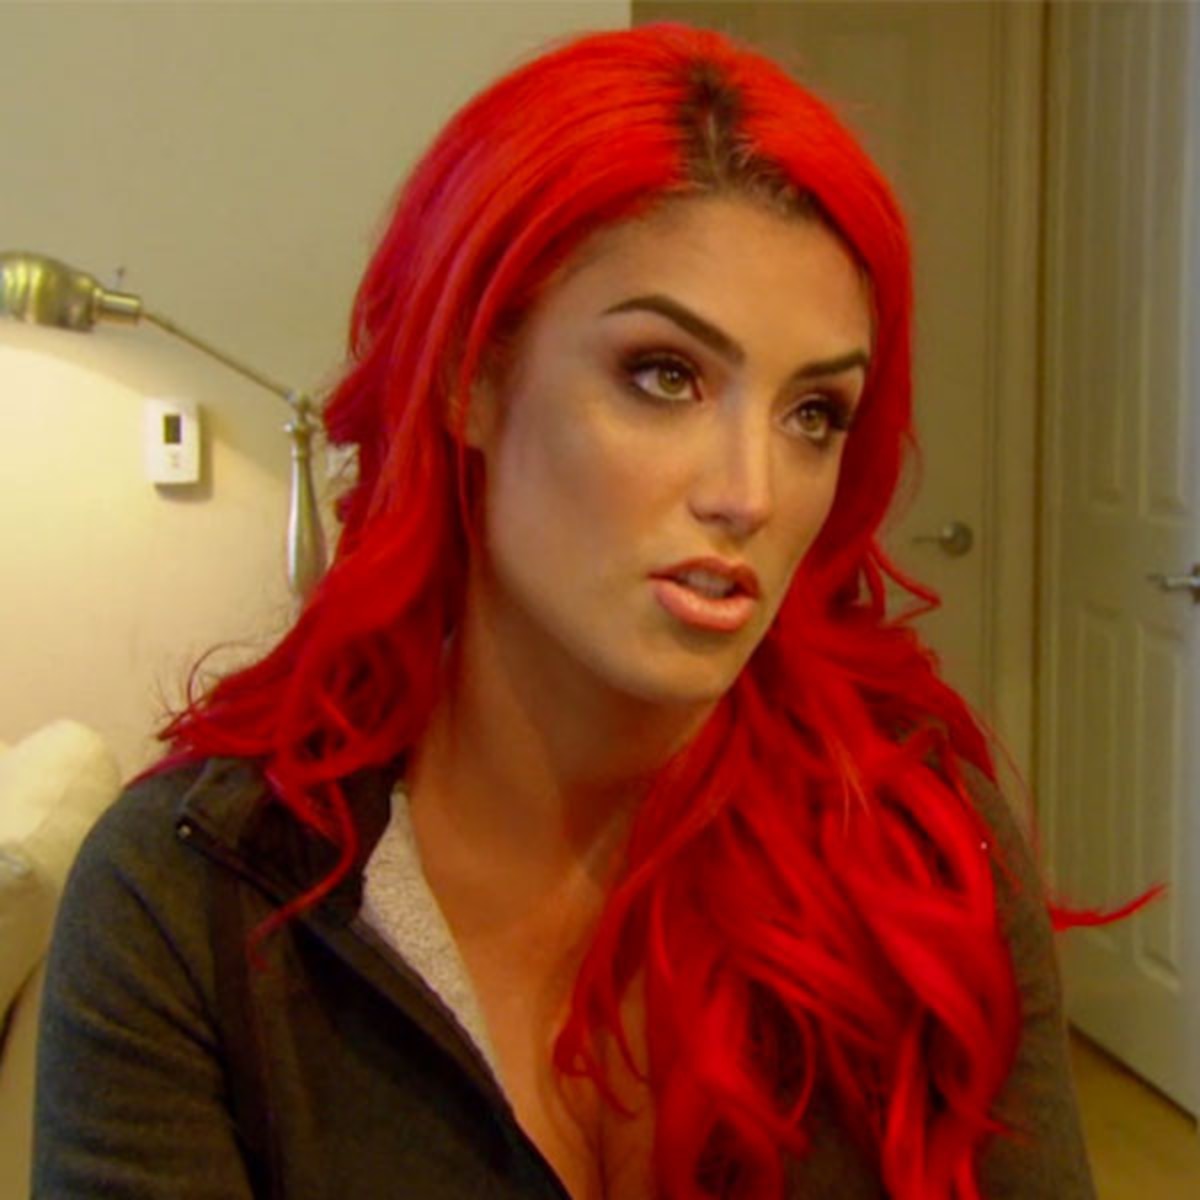 colin gaunt recommends Wwe Diva Red Head